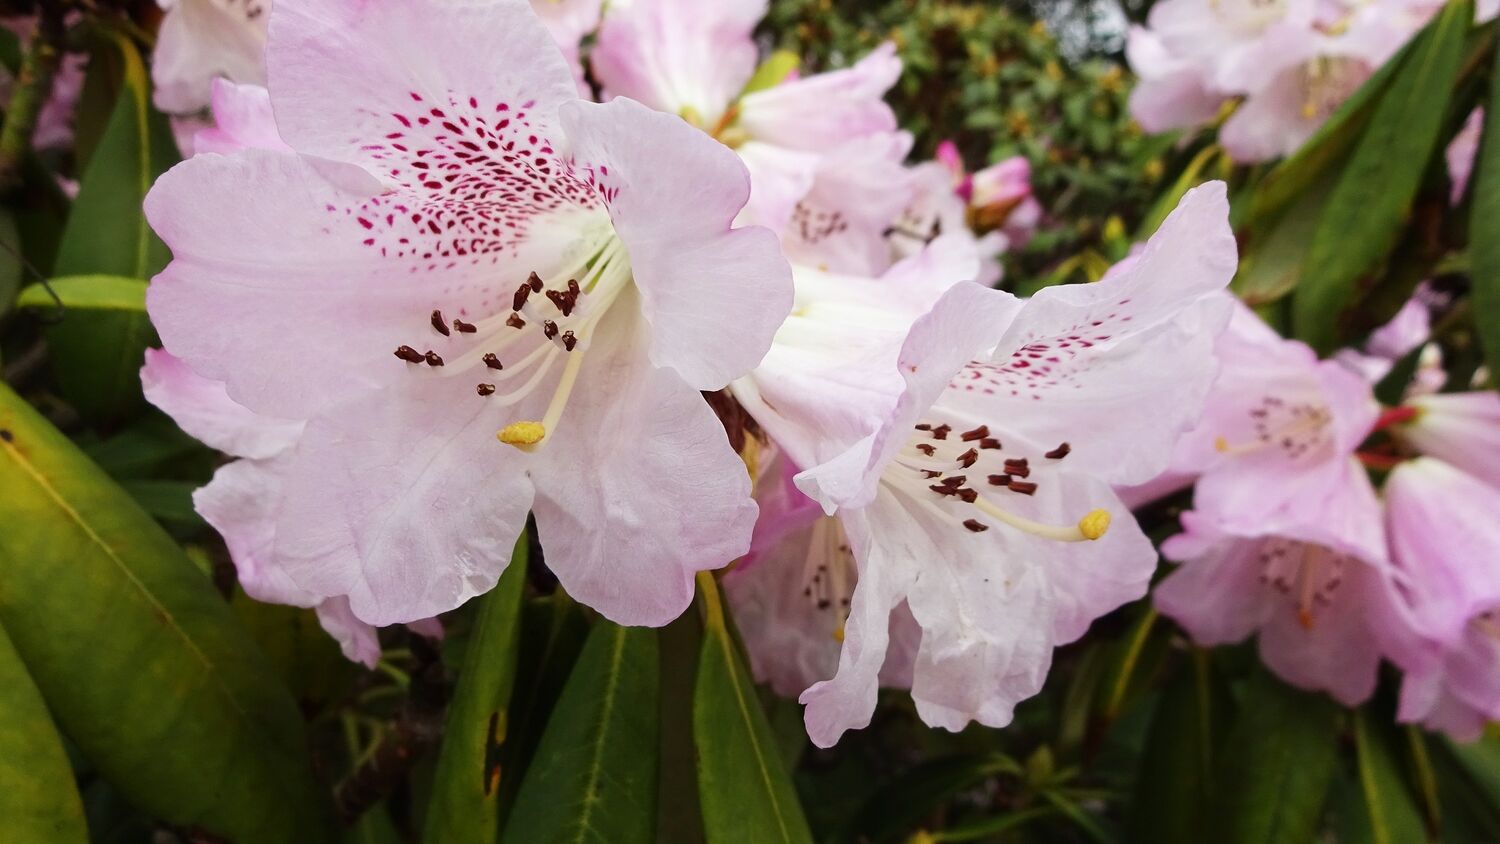 A close-up of a pale pink/purple rhododendron flower, with darker purple spots going deep into the flower on one of the petals.